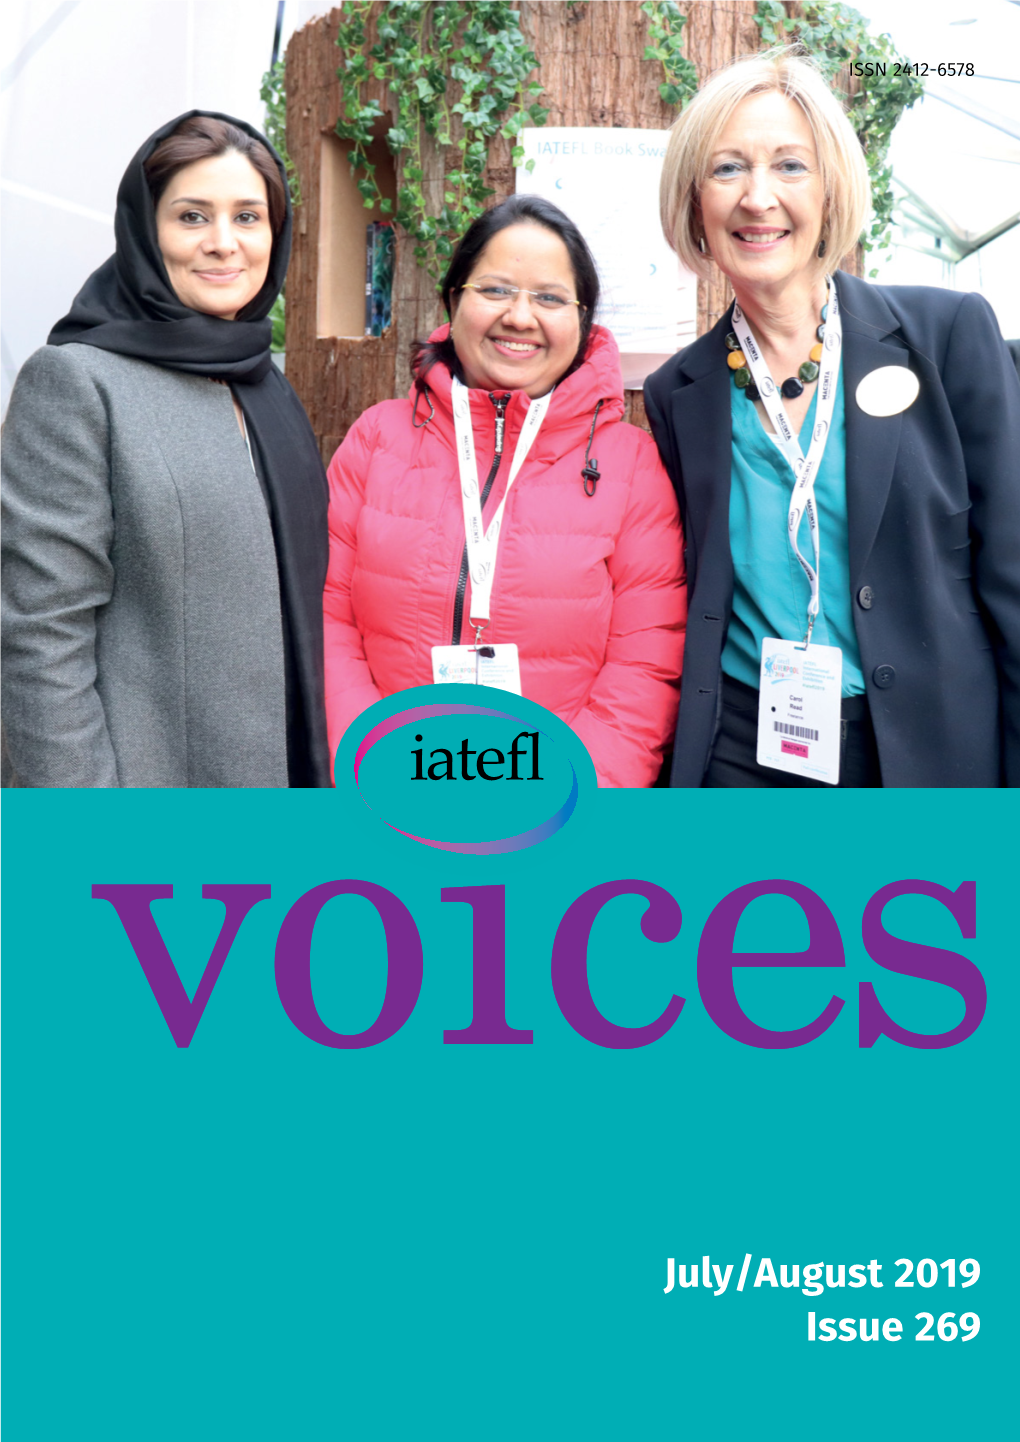 July/August 2019 Issue 269 IATEFL VOICES 269 – July/August 2019 3 July/August 2019 Issue 269 ISSN 2412-6578